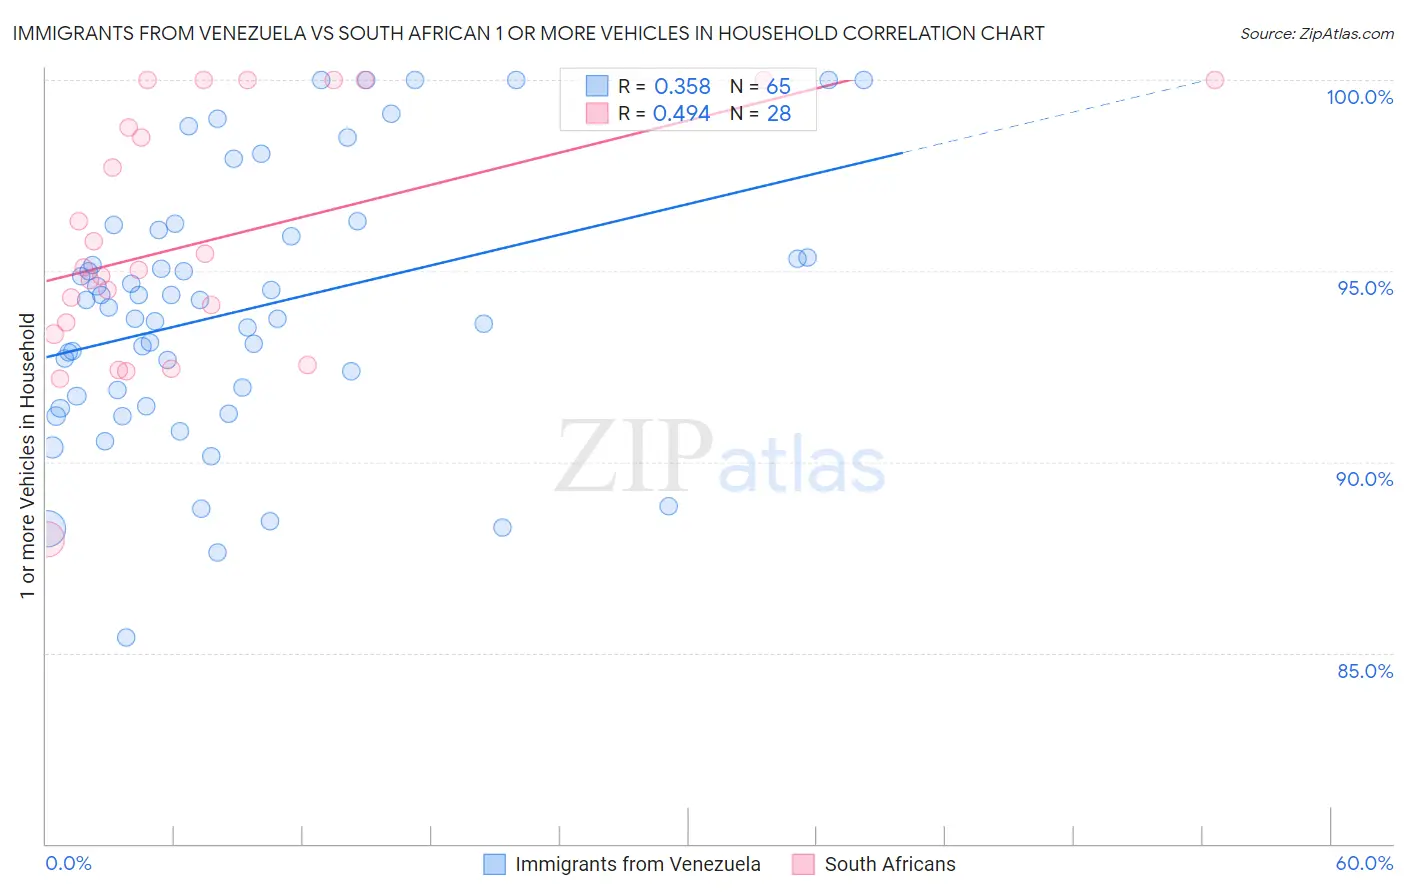 Immigrants from Venezuela vs South African 1 or more Vehicles in Household